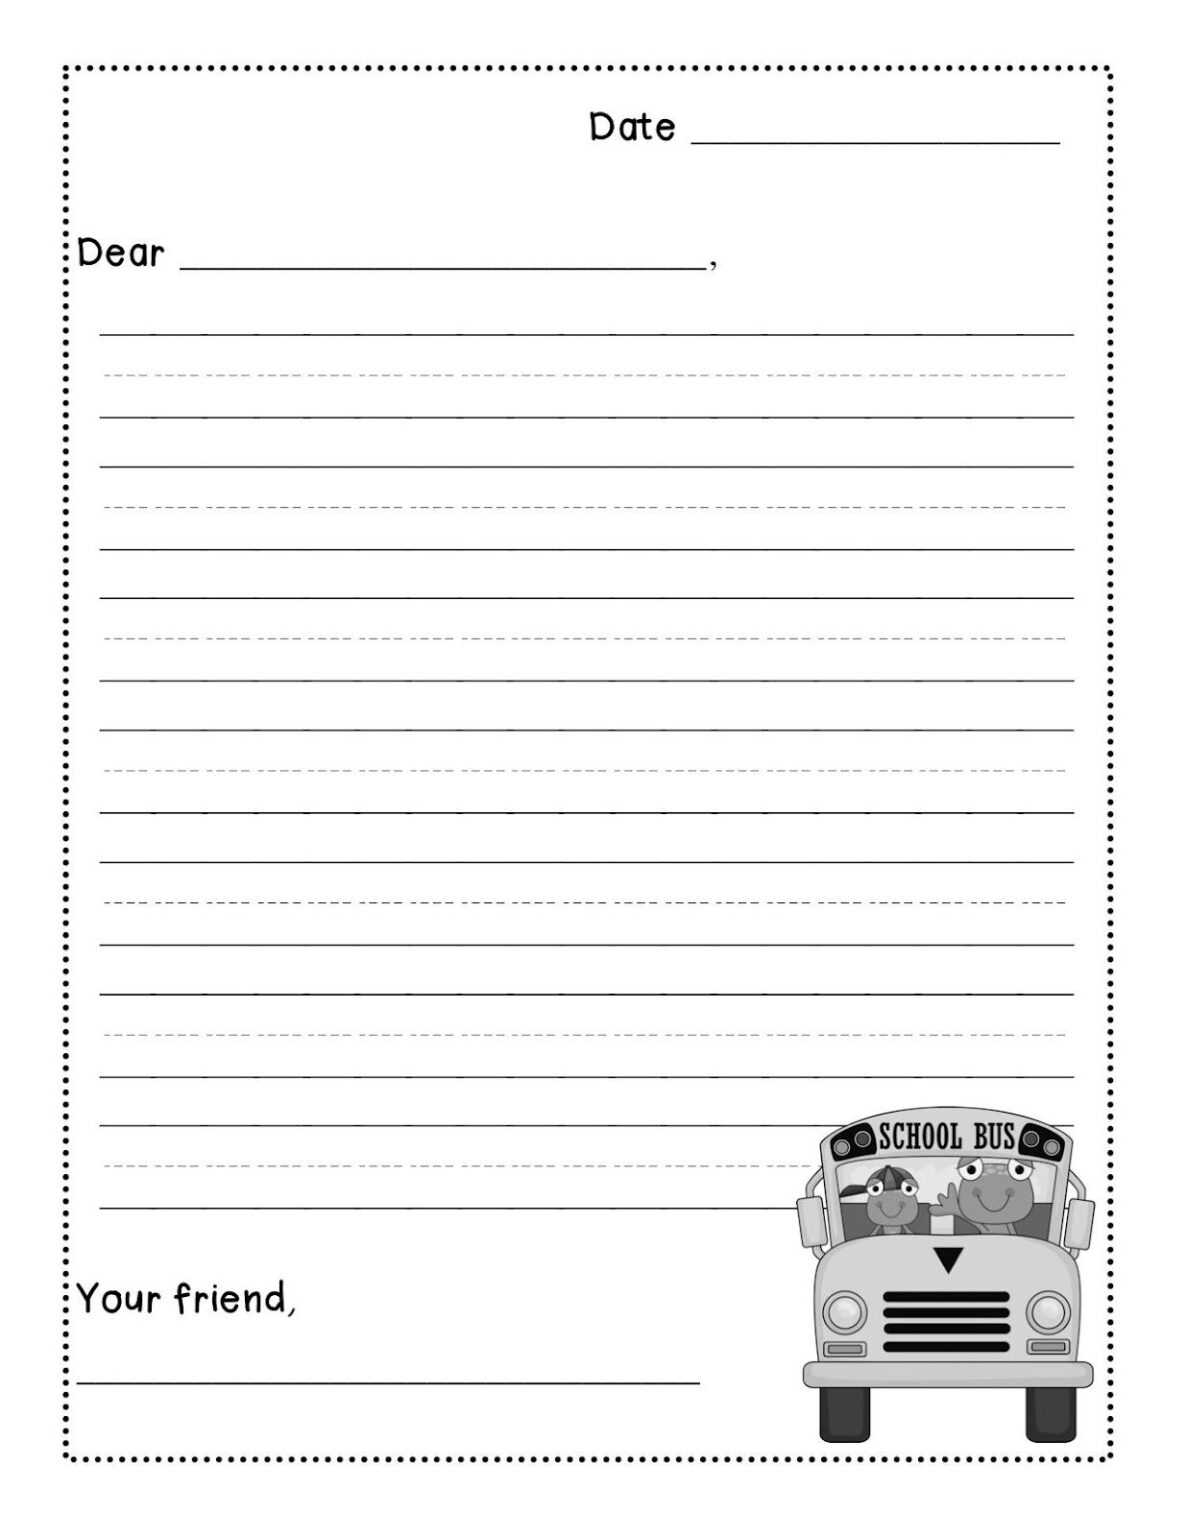 friendly-letter-writing-freebie-levelized-templates-up-for-regarding-blank-letter-writing